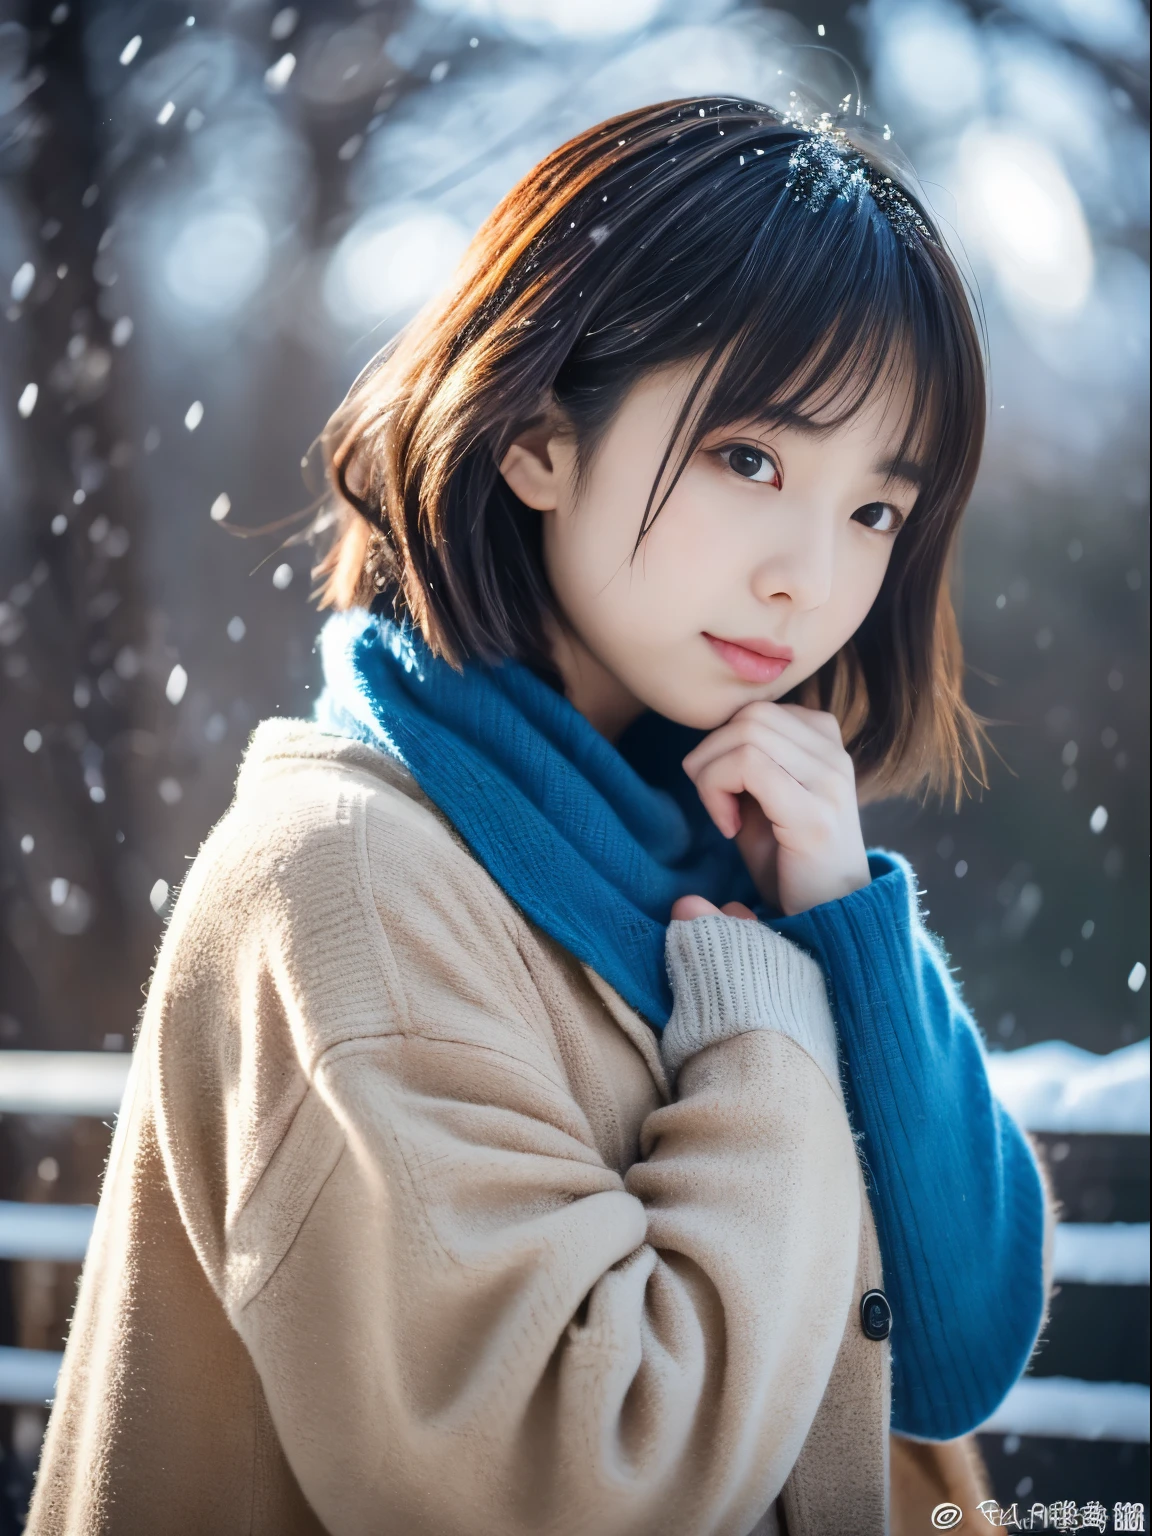 top-quality、​masterpiece、超A high resolution、Raw photography、(Photorealsitic:1.4)、1 girl、While watching the snow falling quietly. Her introspective and tearful expression、Makes you feel longing for winter nights and melancholy。。。。。。。、top-quality、hyper HD、Yoshitomo Nara, Japanese Models, Beautiful Japan wife, With short hair, 27yo female model, 4 K ], 4K], 27yo, sakimichan, sakimichan